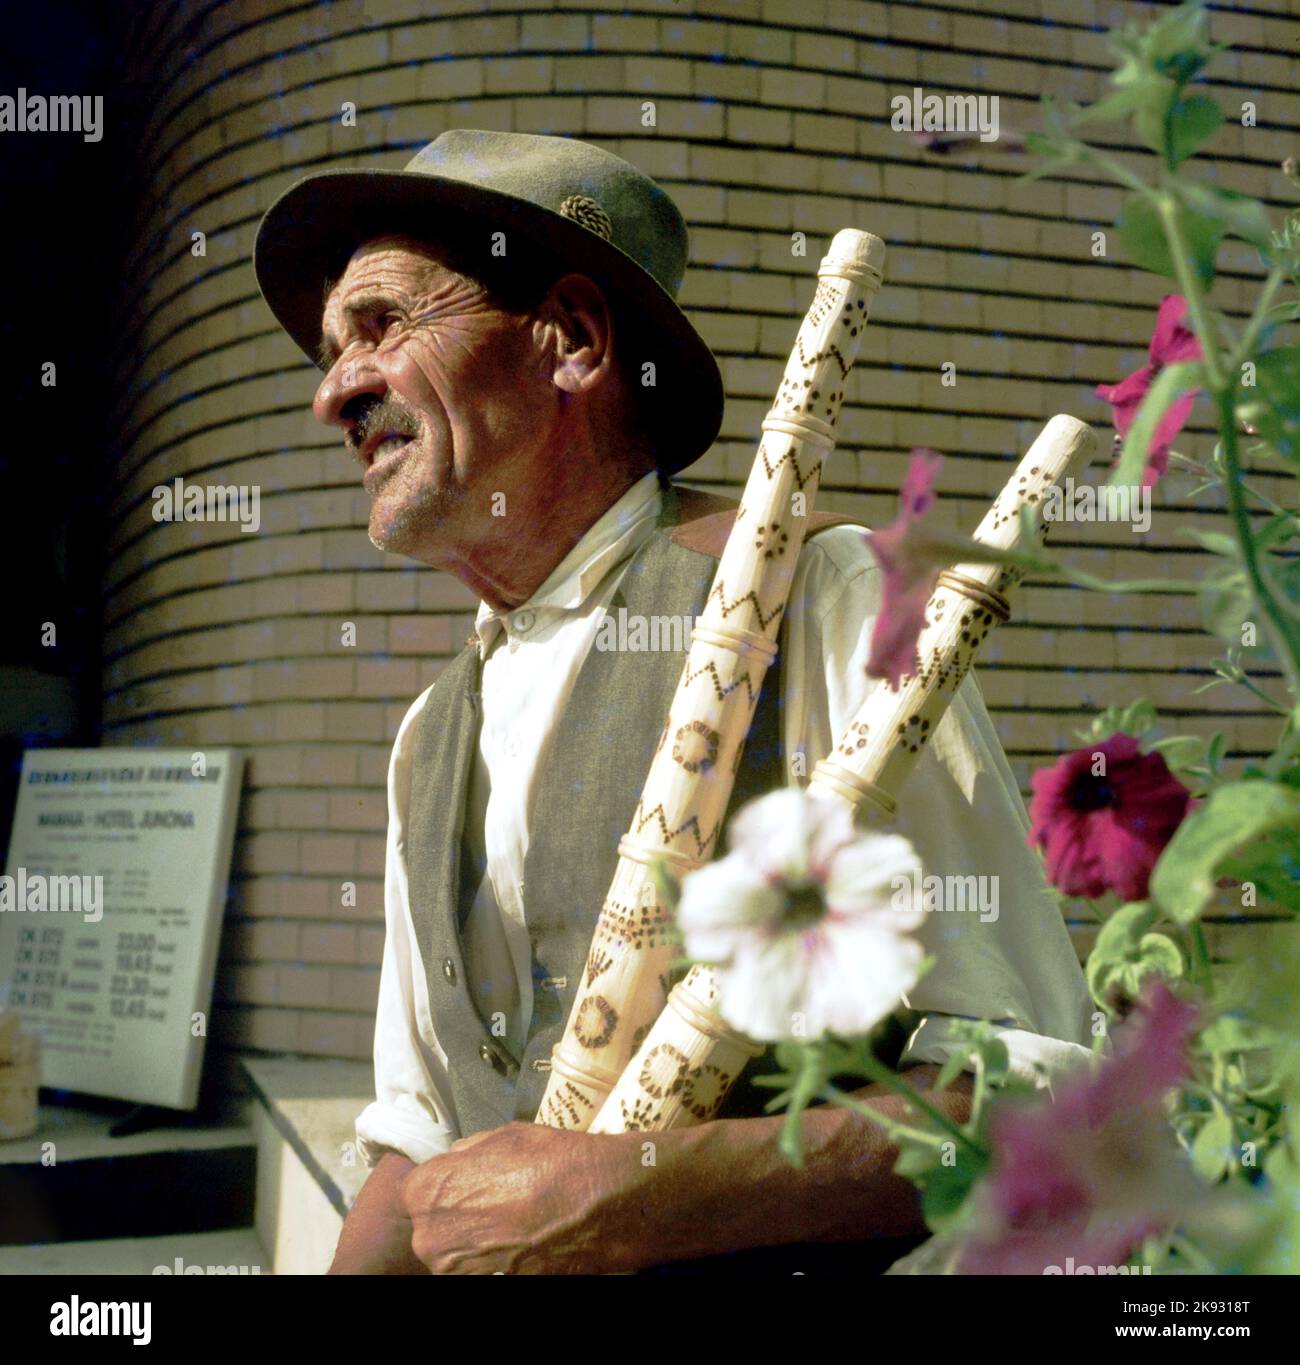 Romanian man holding two alphorns, decorated with traditional folk symbols, approx. 1973 Stock Photo